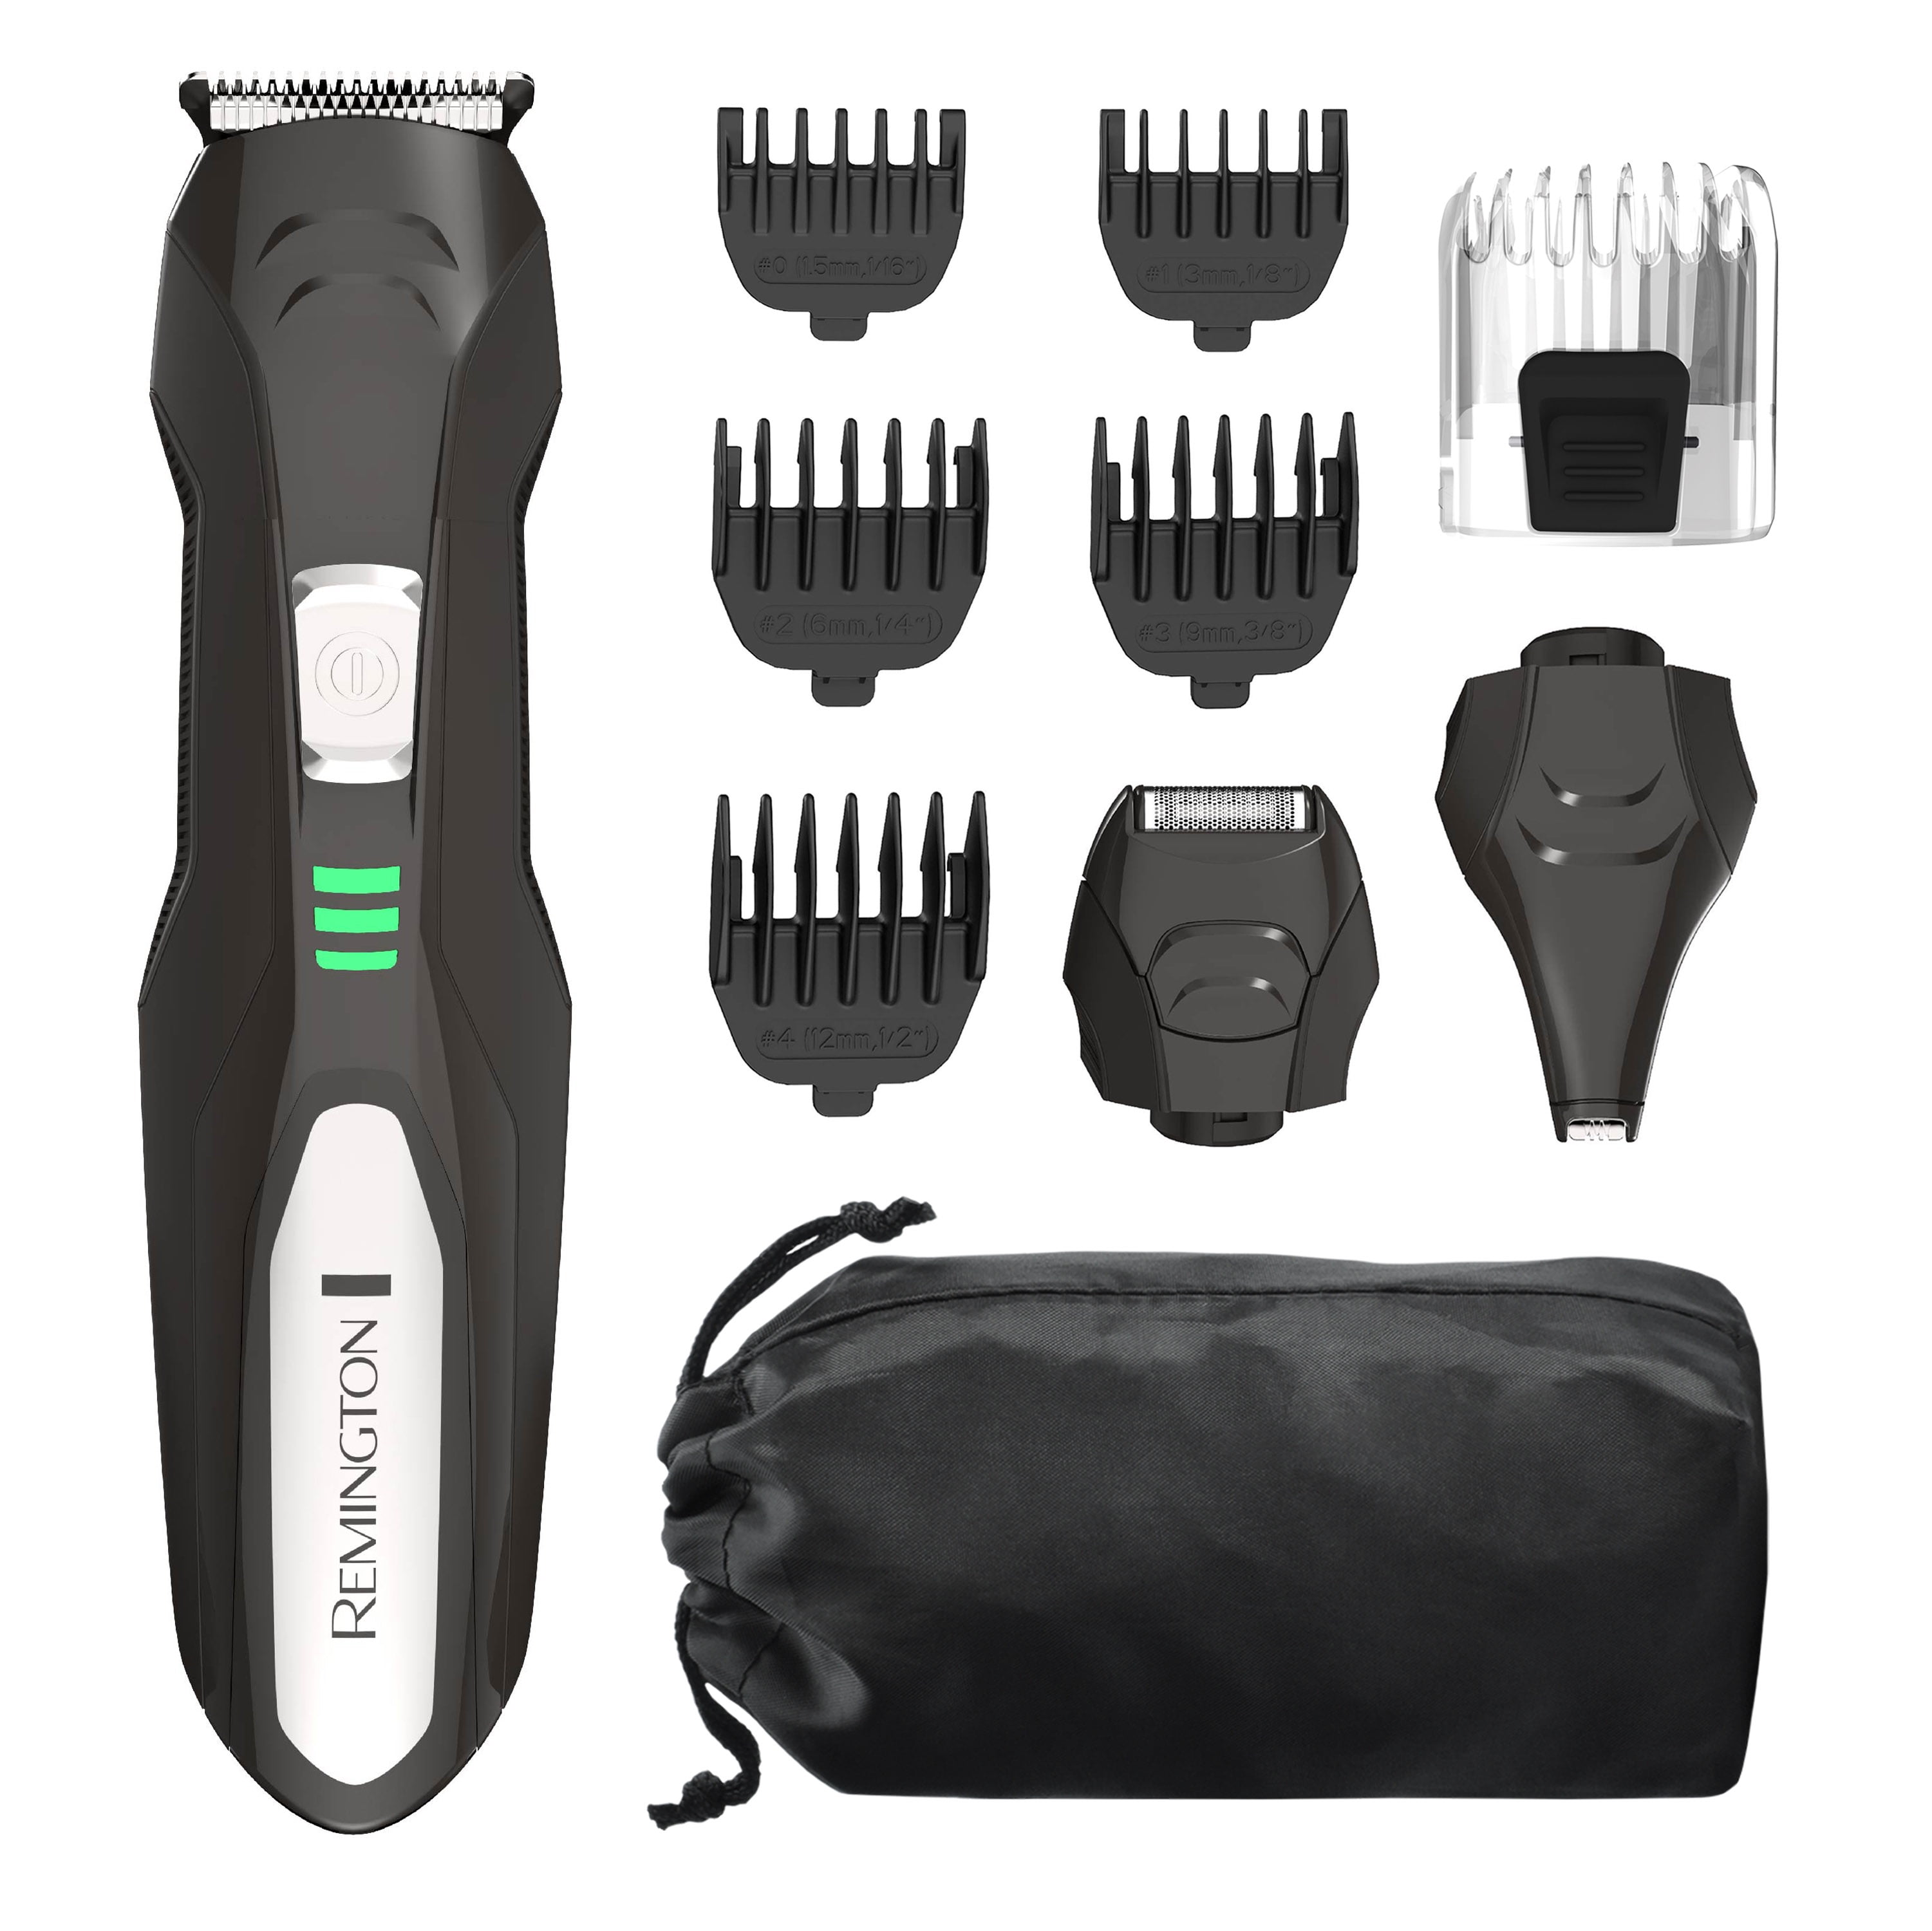 remington rechargeable clippers